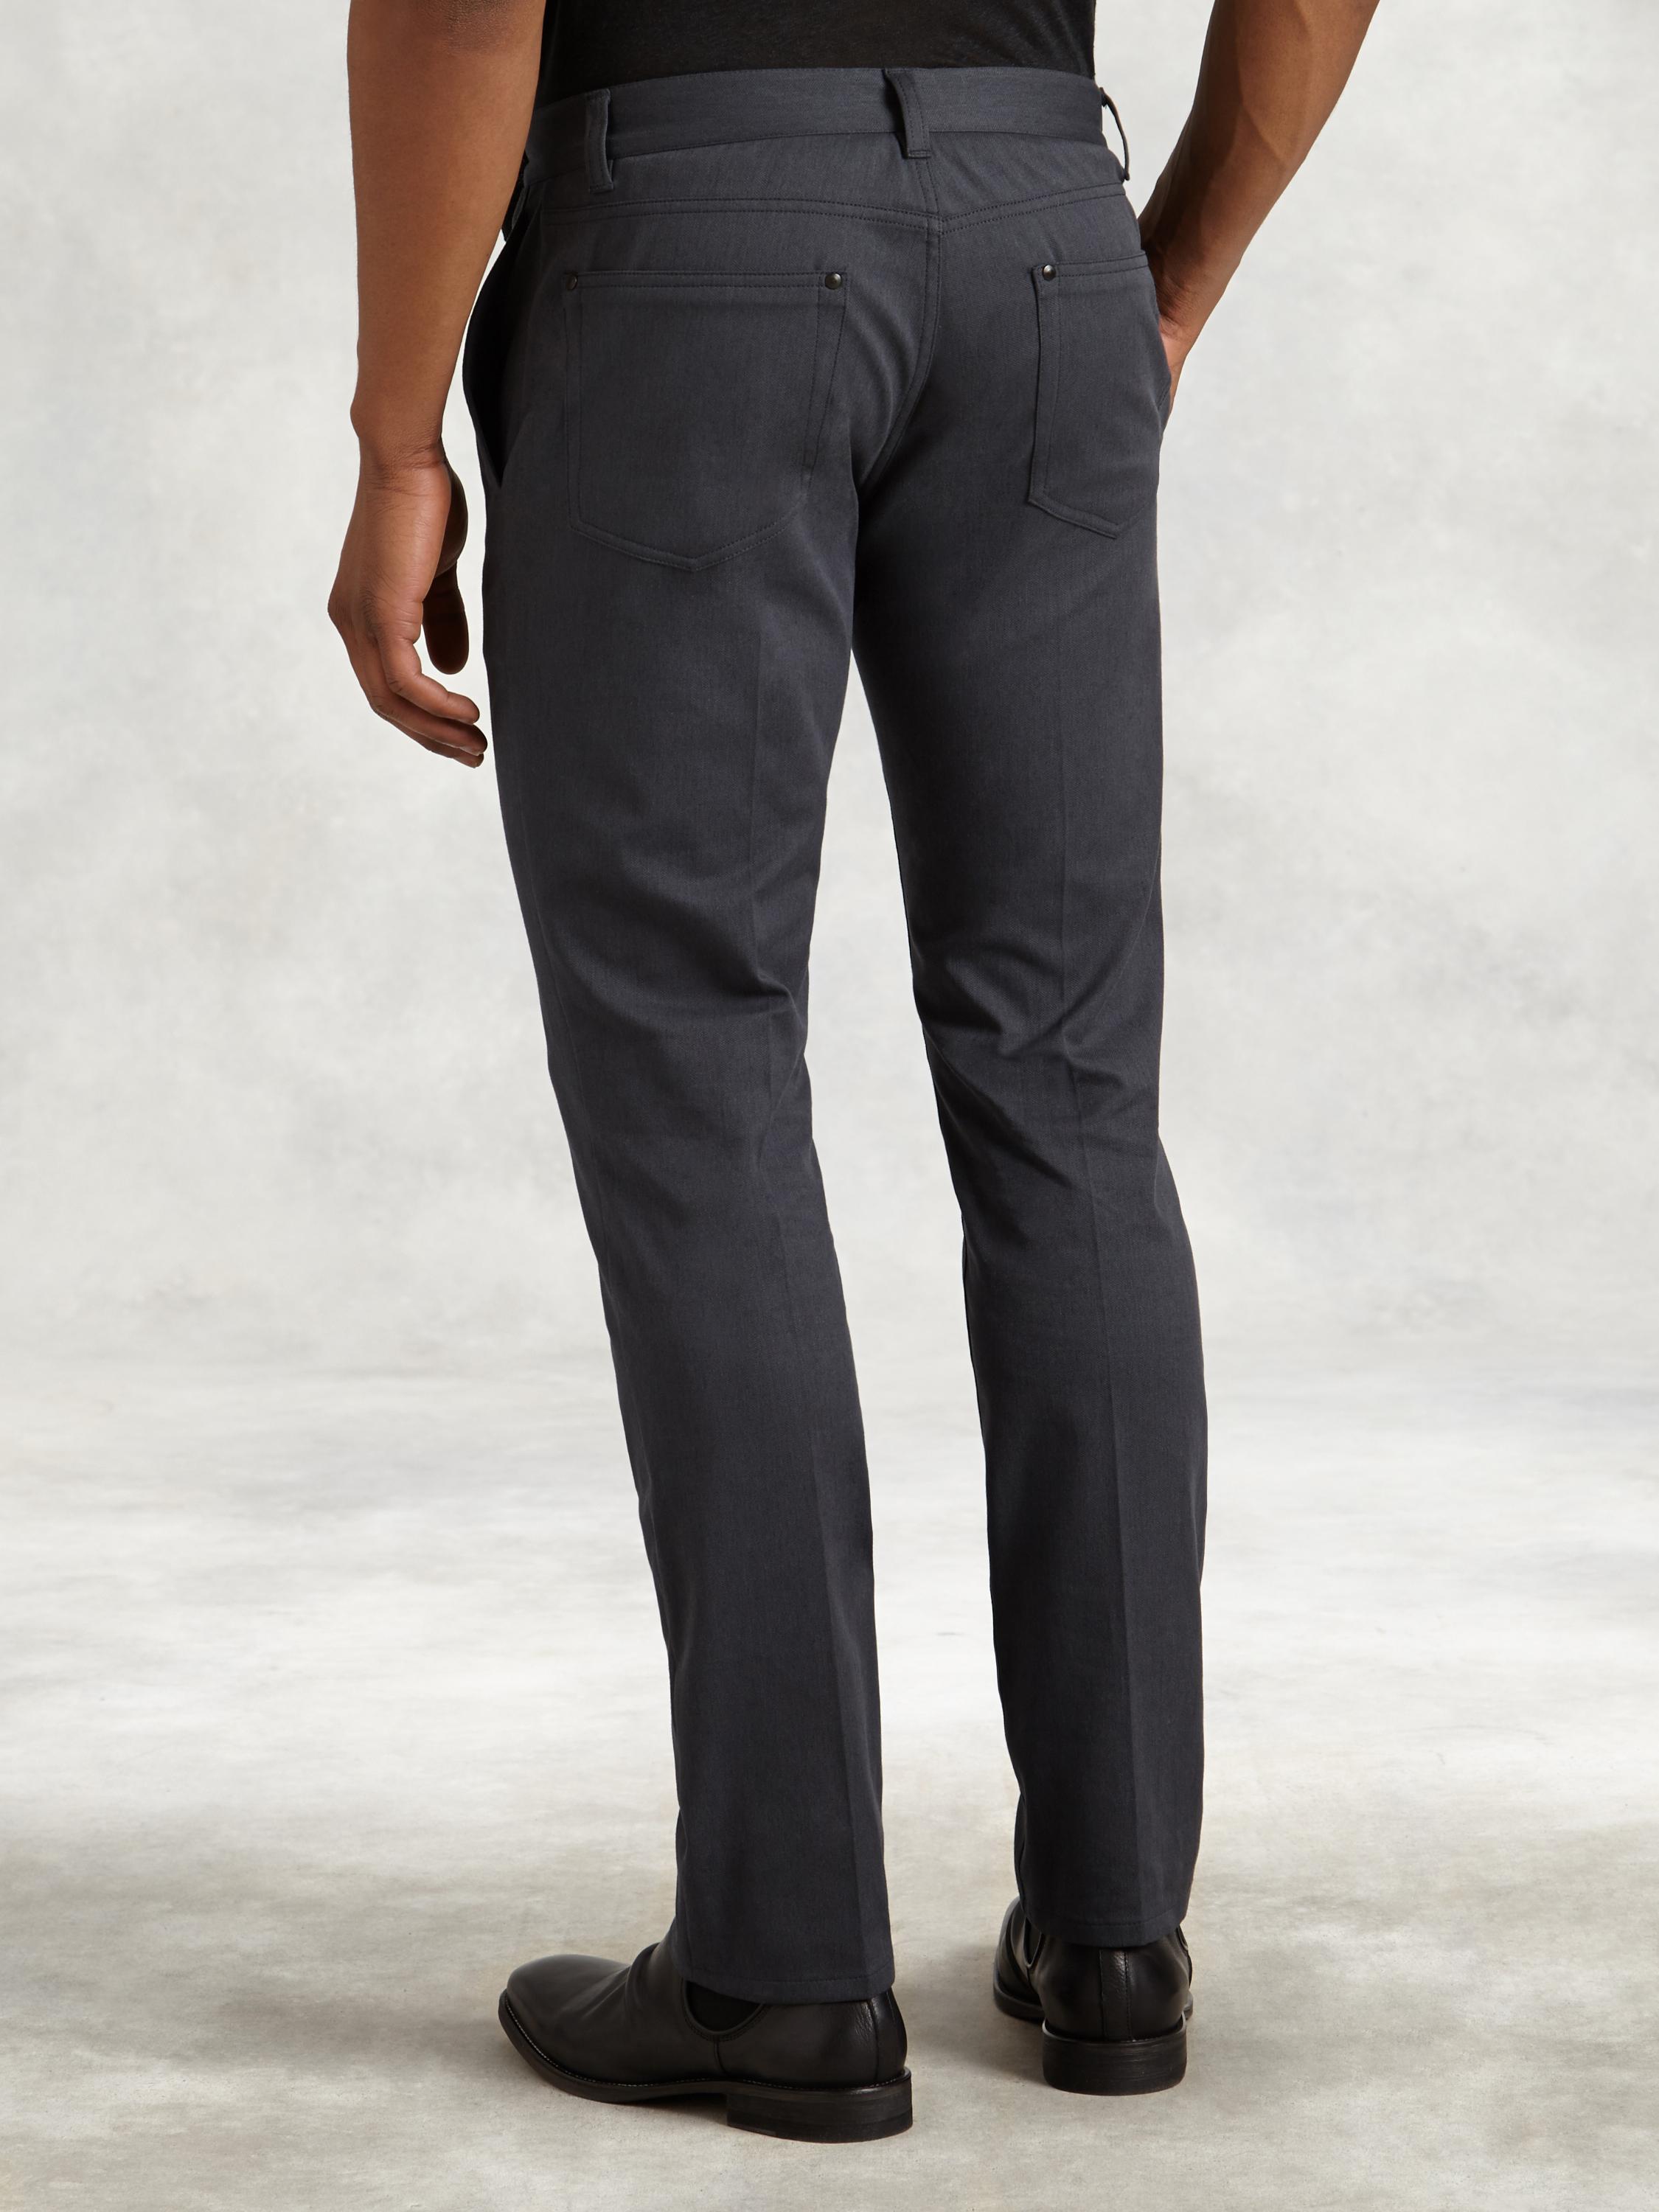 Cotton Stretch Motor City Pant image number 2